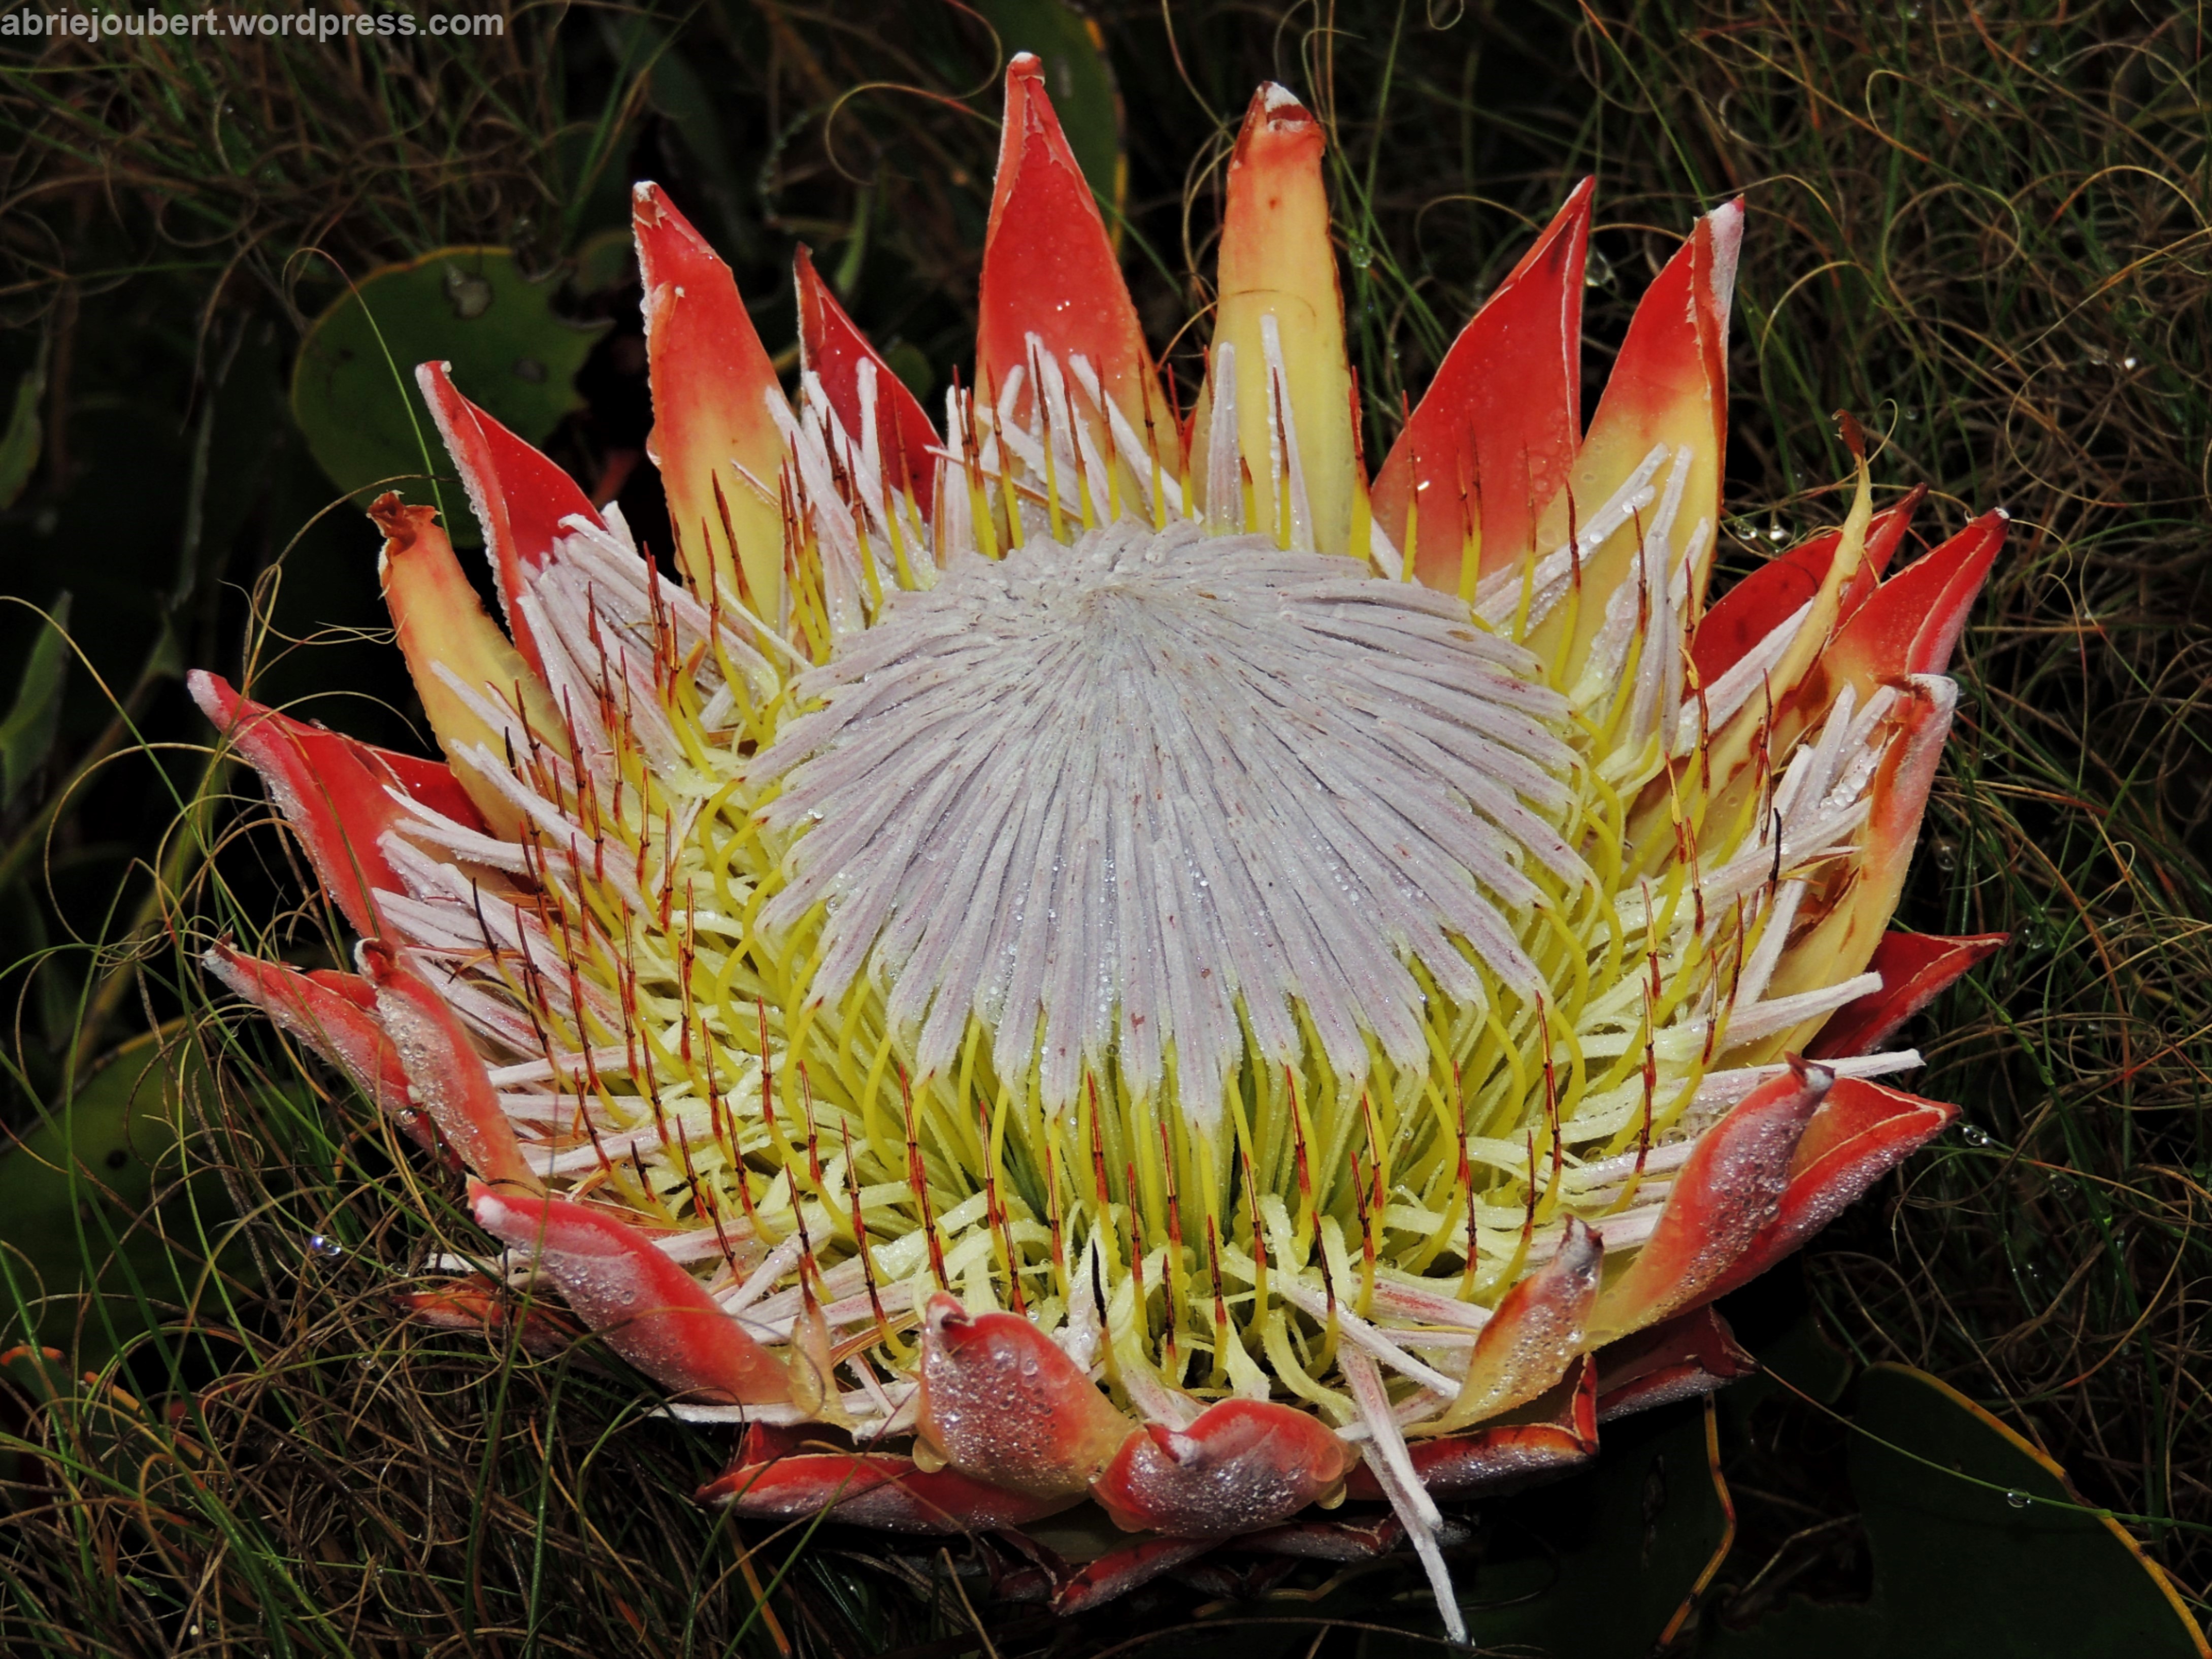 Protea cynaroides - the first among flowers